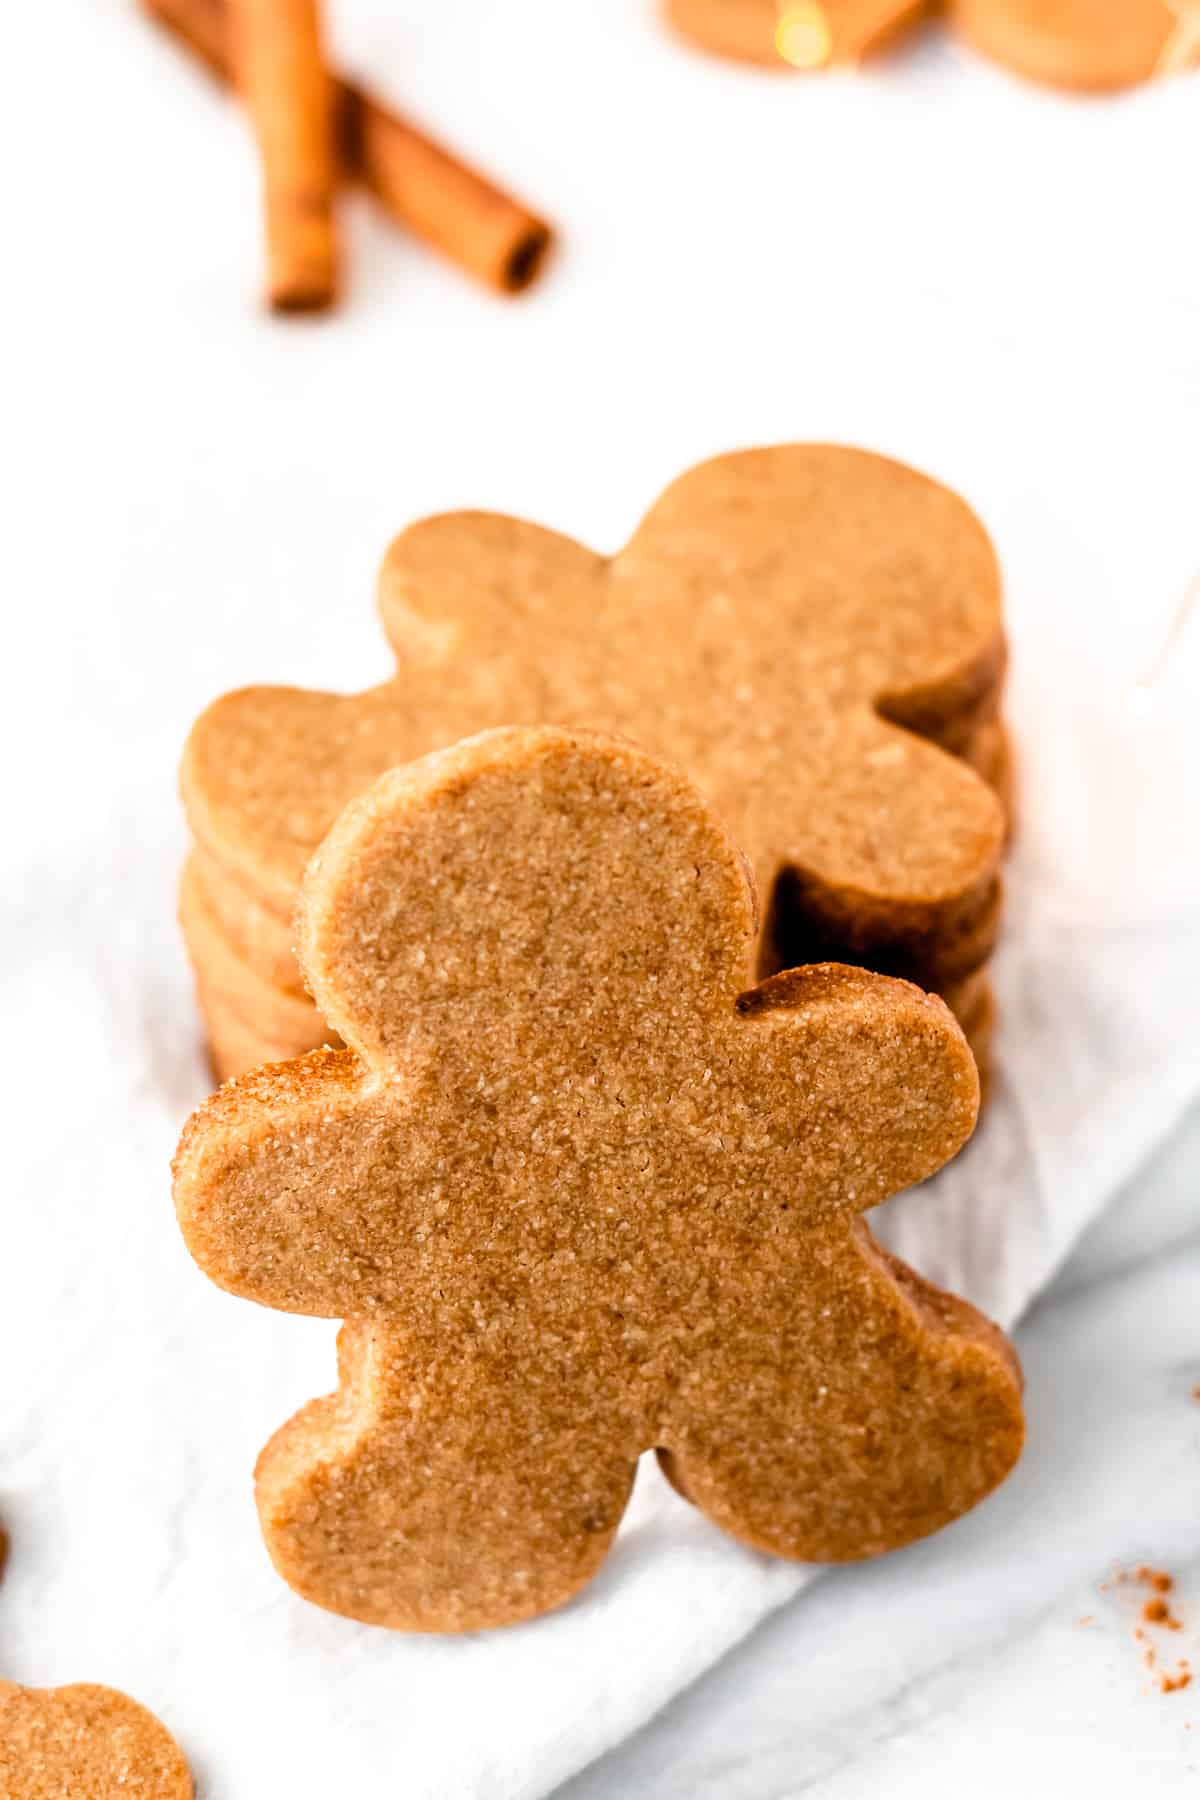 A stack of gingerbread cookies with one propped upright on the stack and cinnamon sticks in the background.